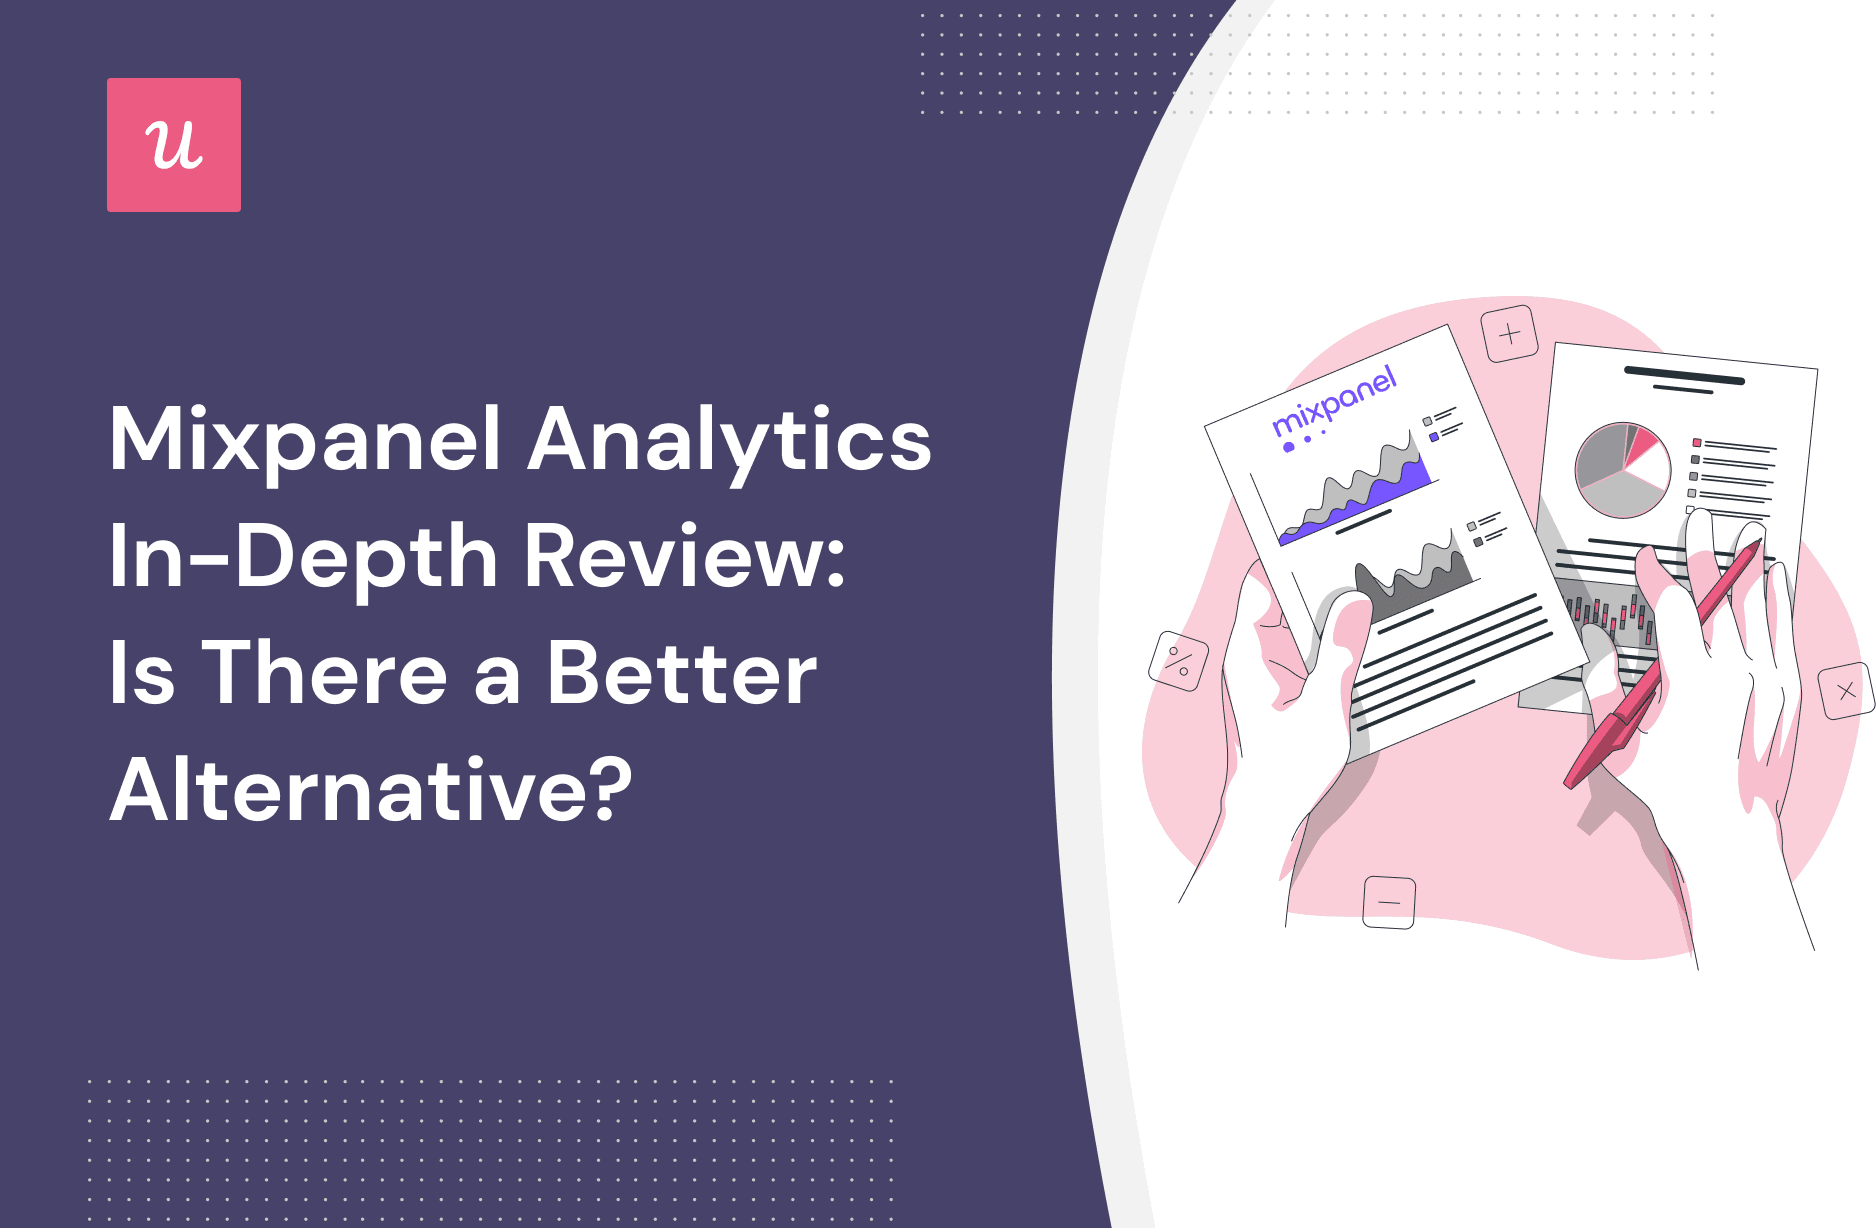 Mixpanel Analytics In-Depth Review: Is There a Better Alternative? cover